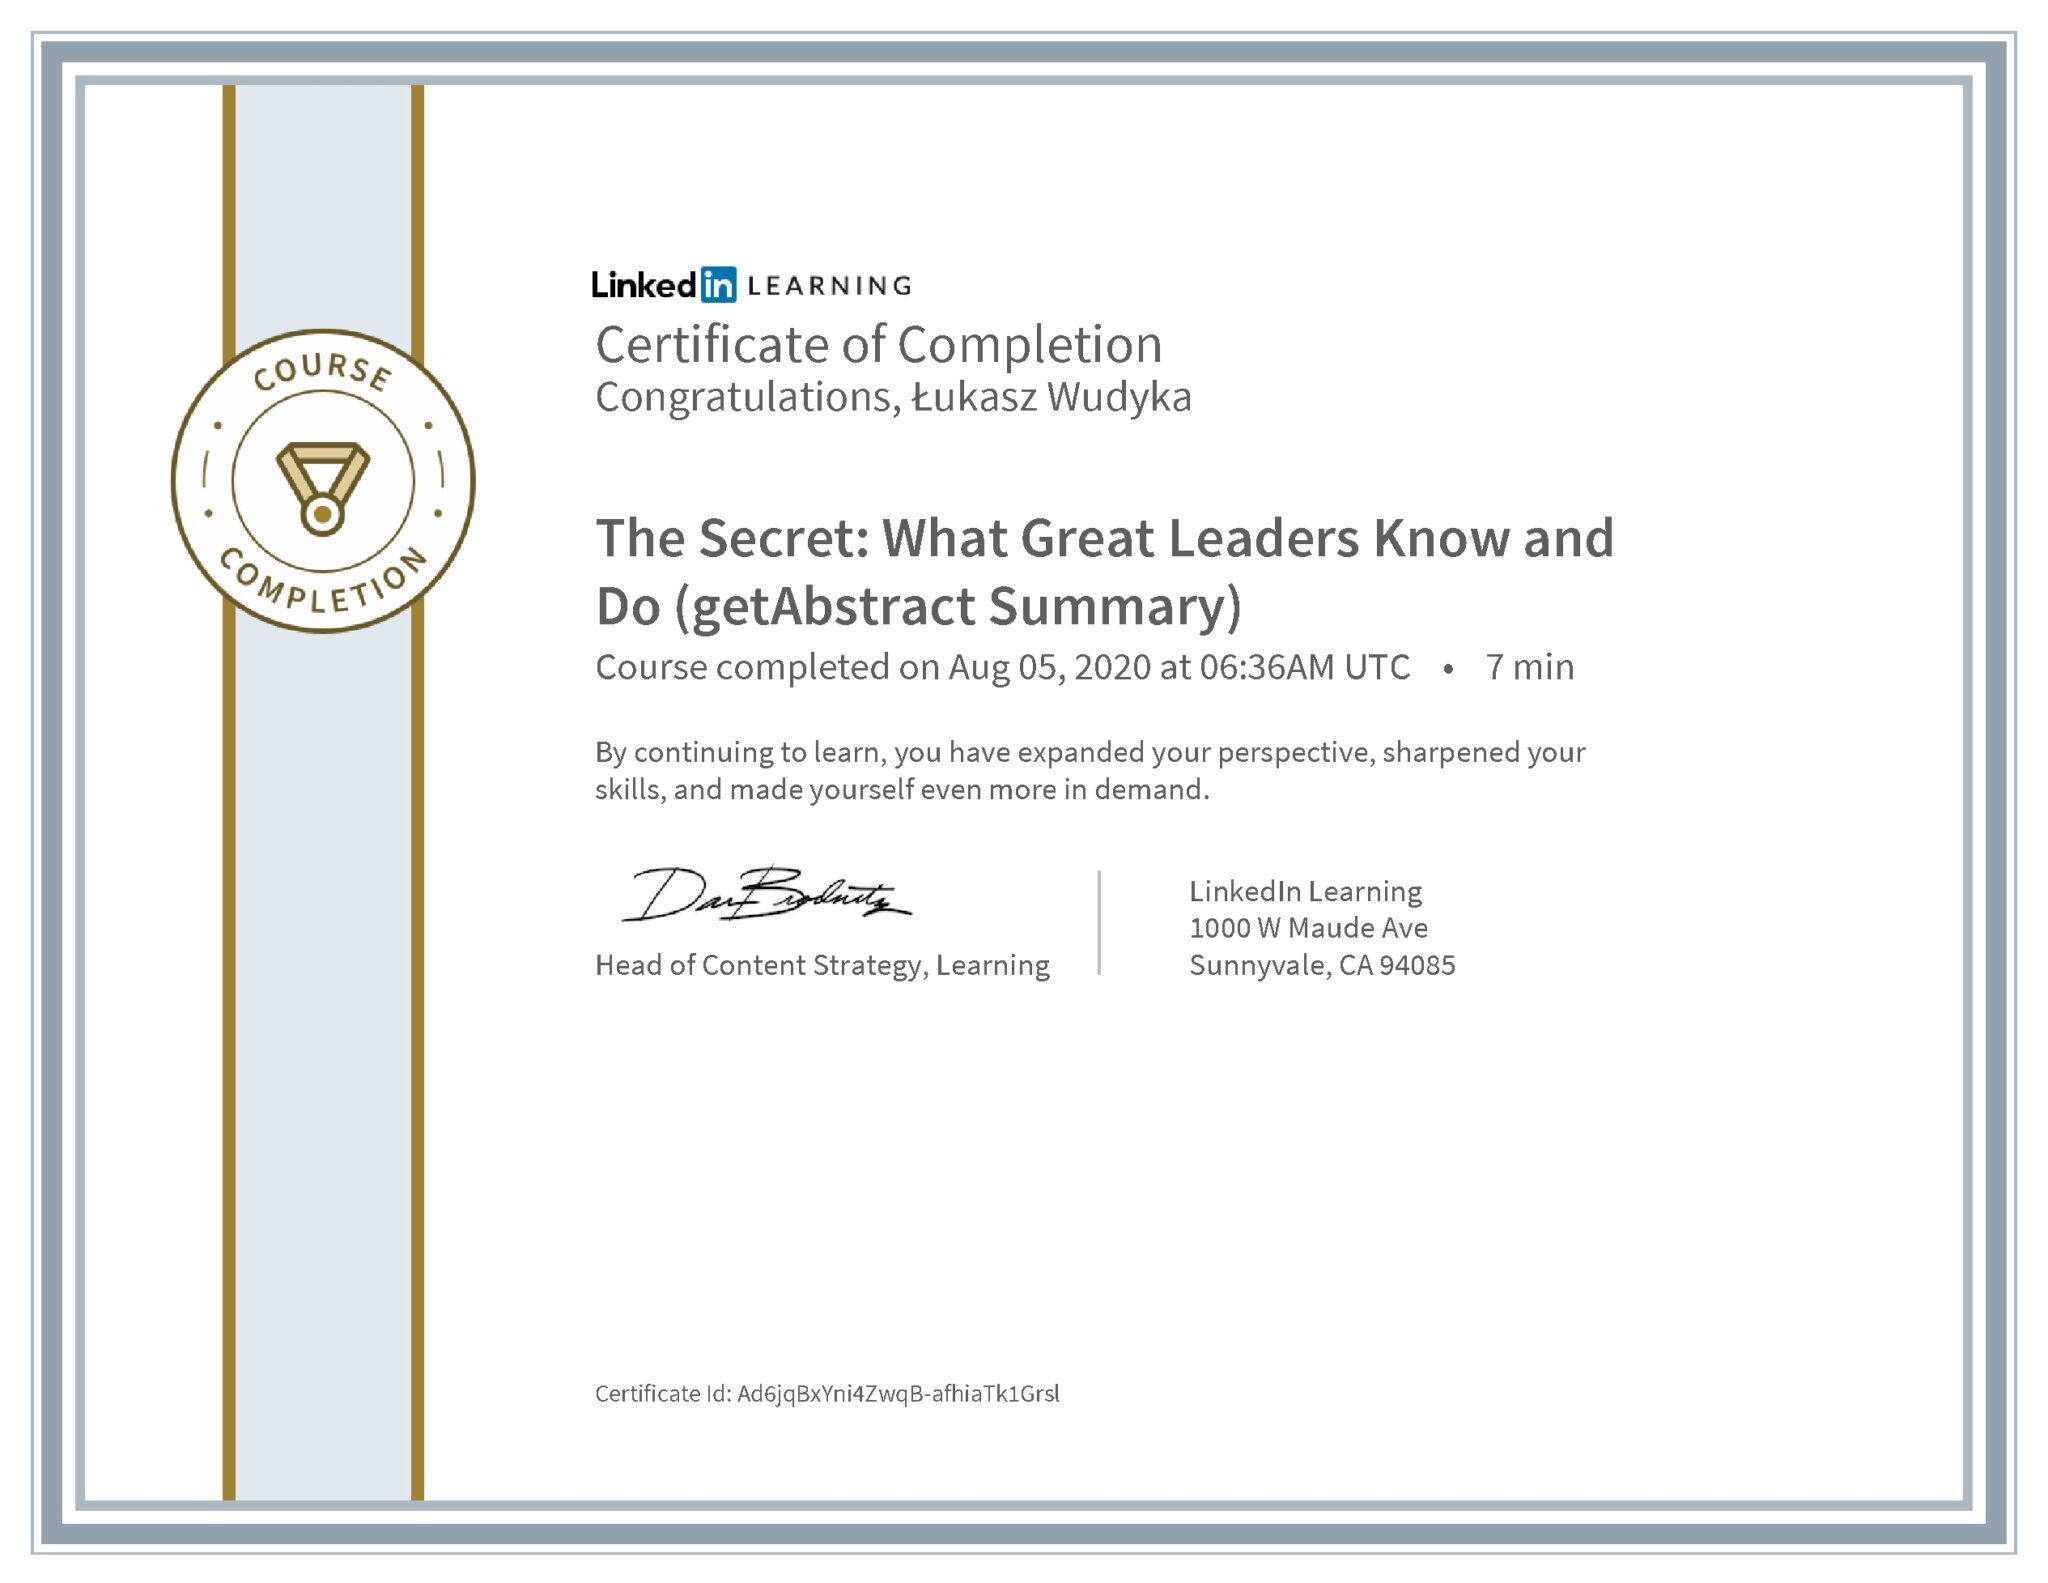 Łukasz Wudyka certyfikat LinkedIn The Secret: What Great Leaders Know and Do (getAbstract Summary)